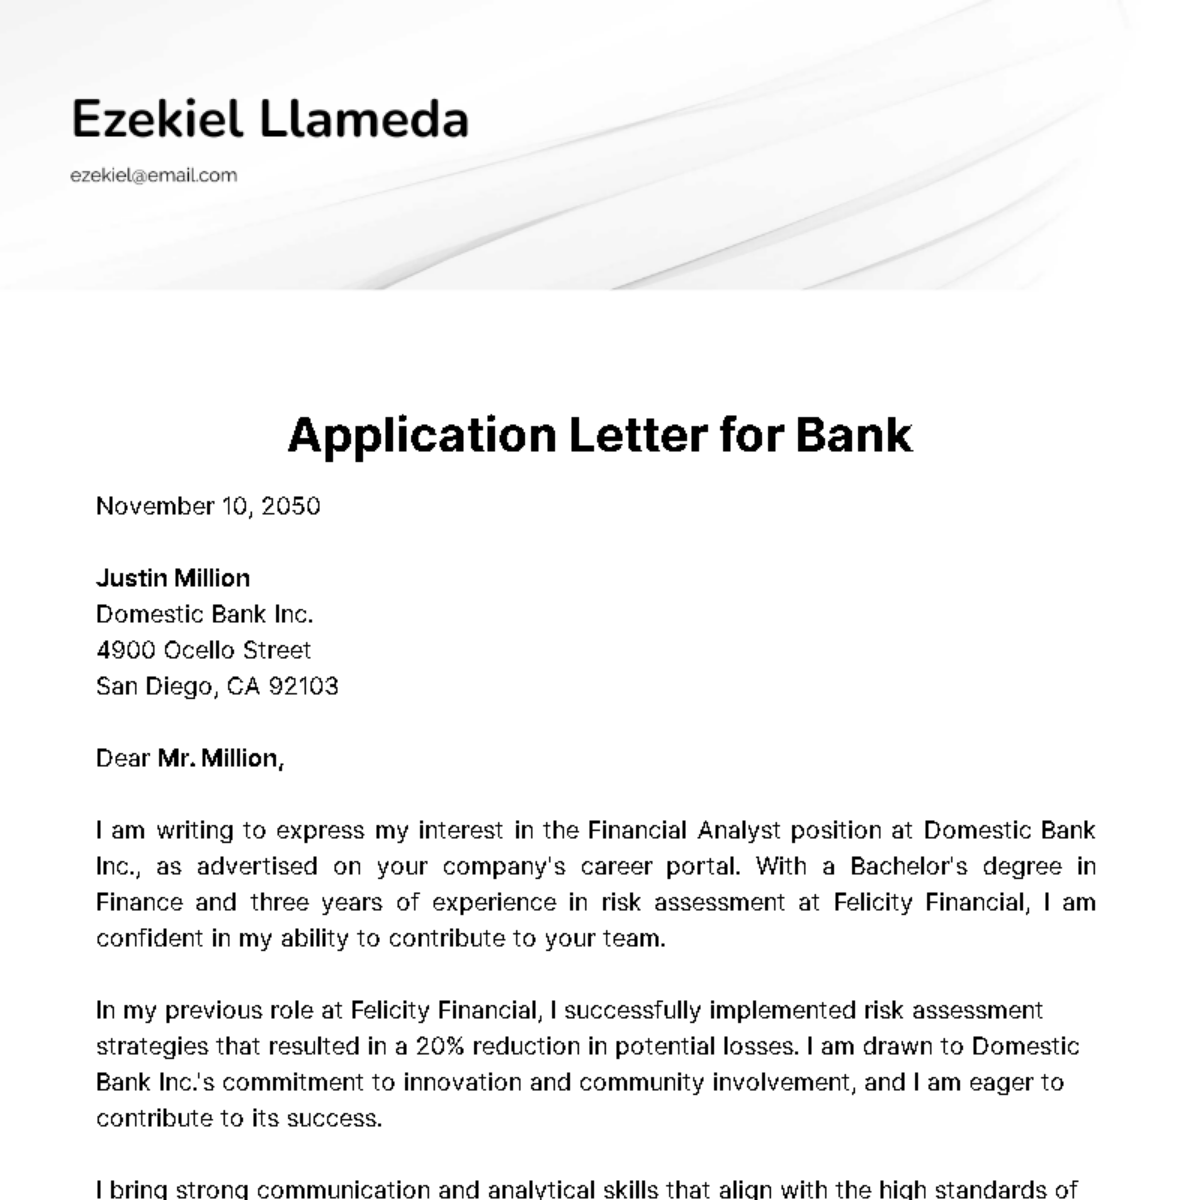 Appplication Letter for Bank  Template